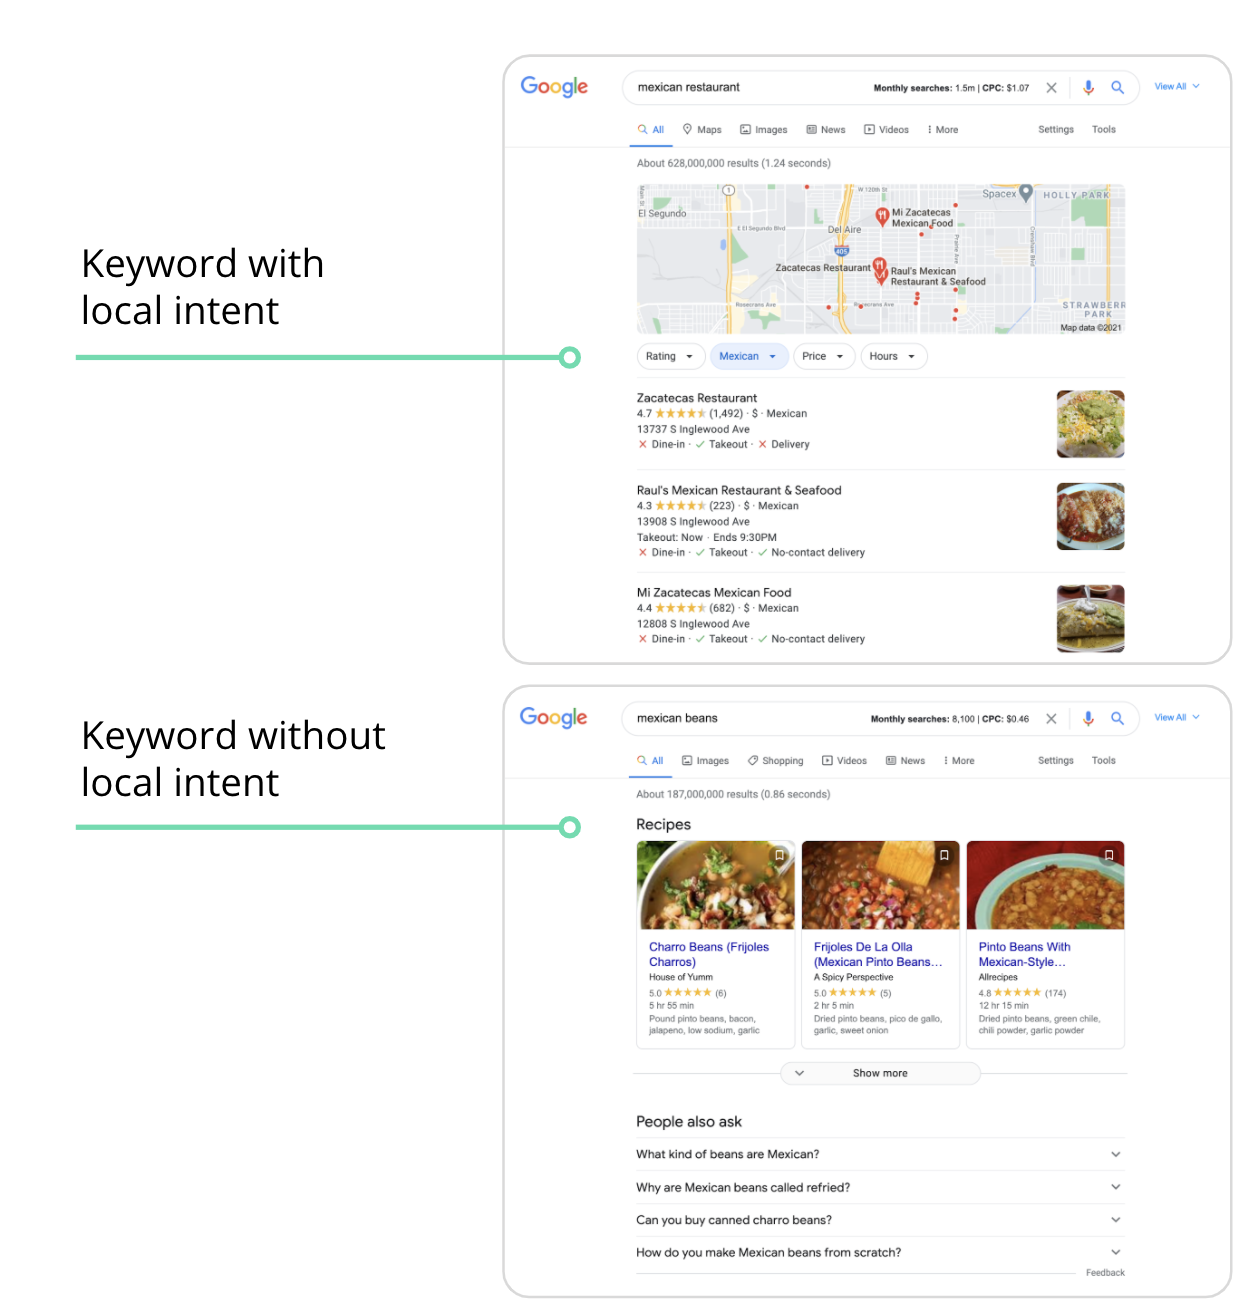 Keywords with local intent